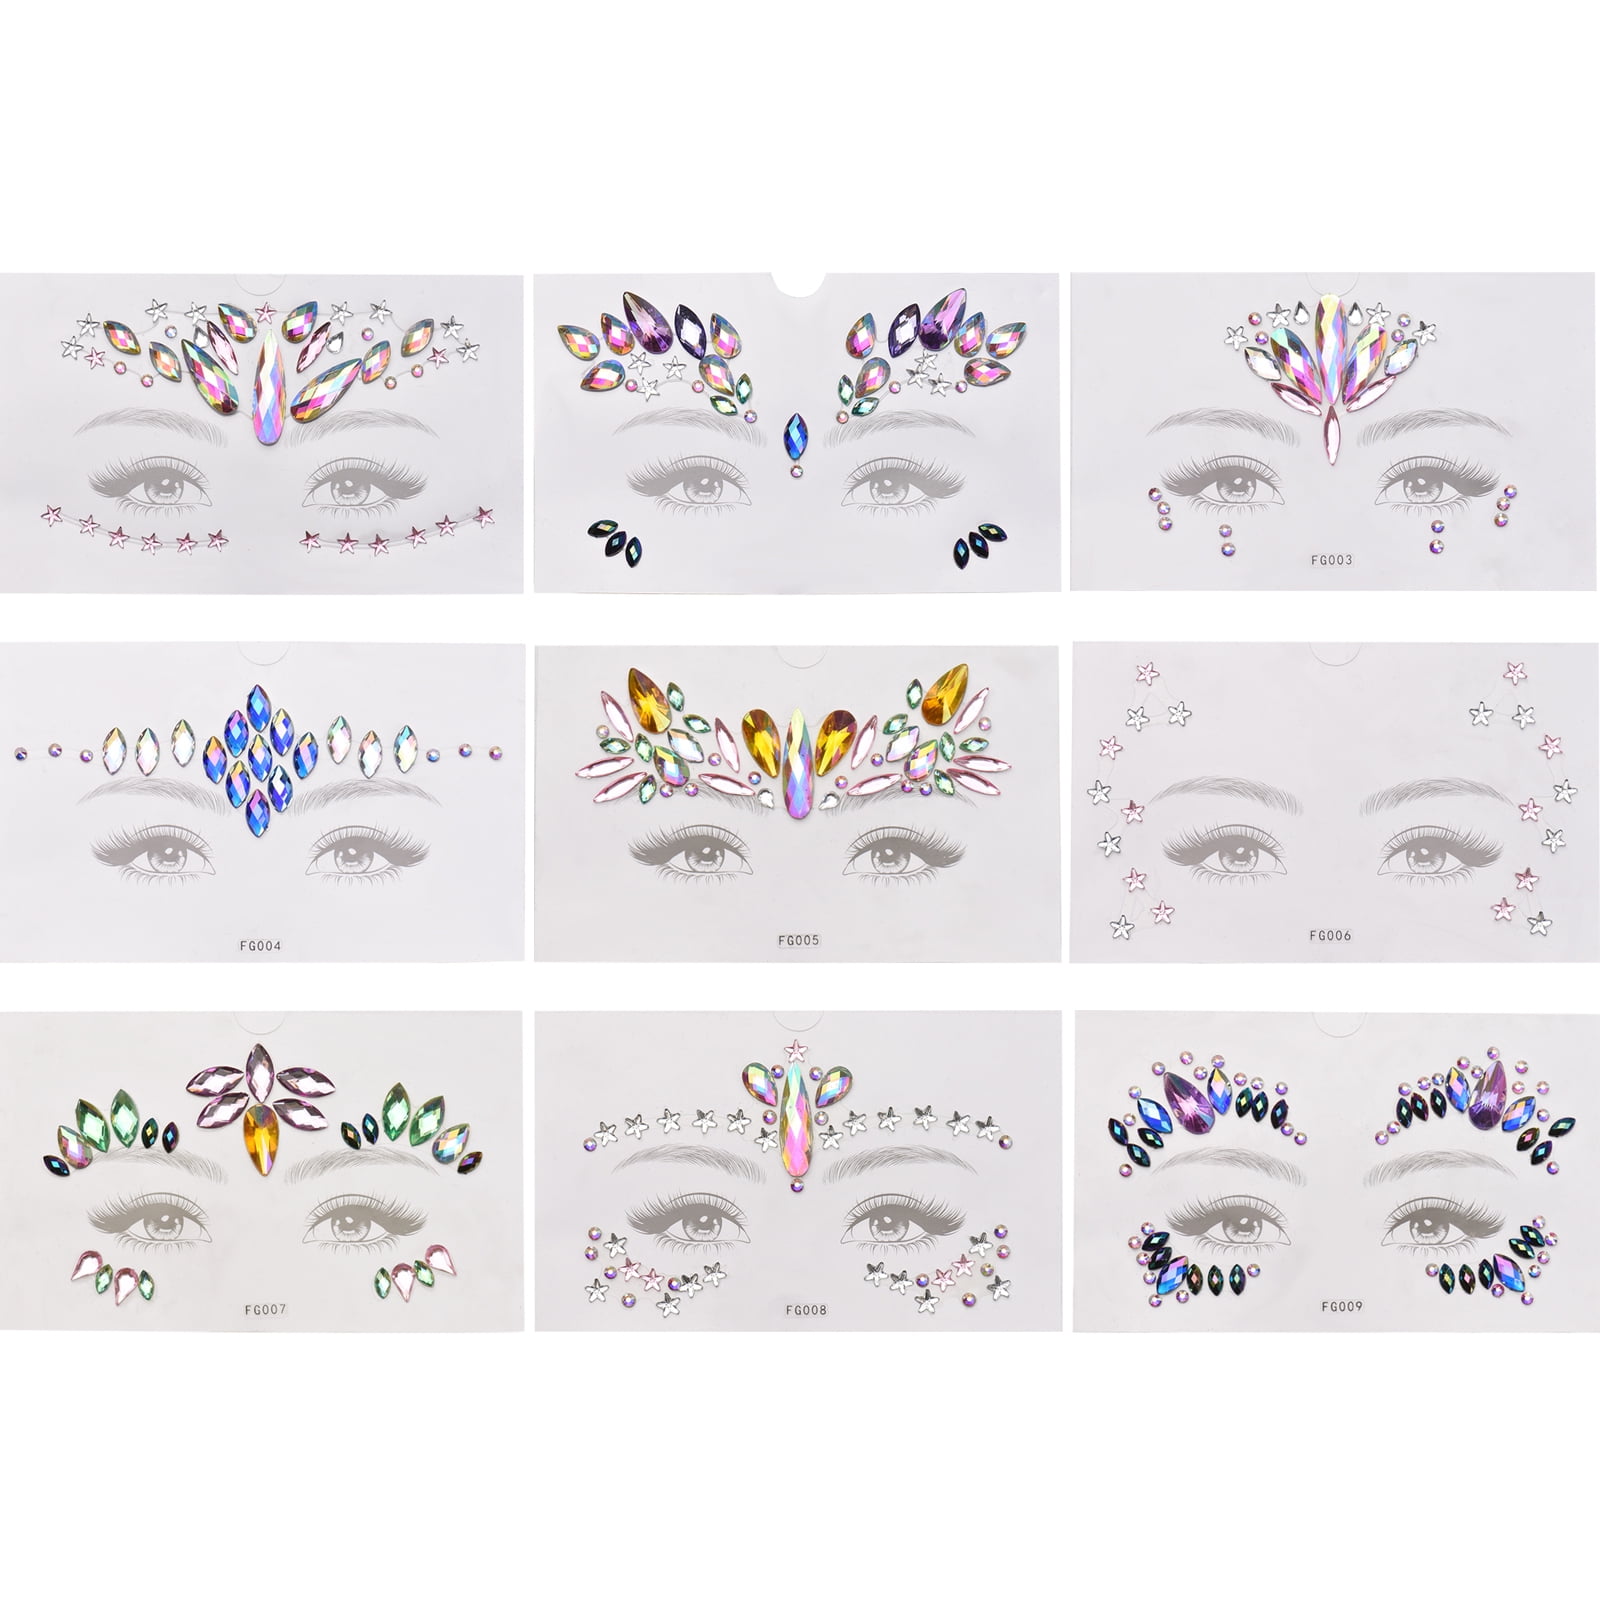 Rhinestone Stickers 2475 PCS, Nicpro Self Adhesive Face Gems Stick on Body  Jewels Crystal in 3 Size 15 Colors,15 Embellishments Sheet for Decorations